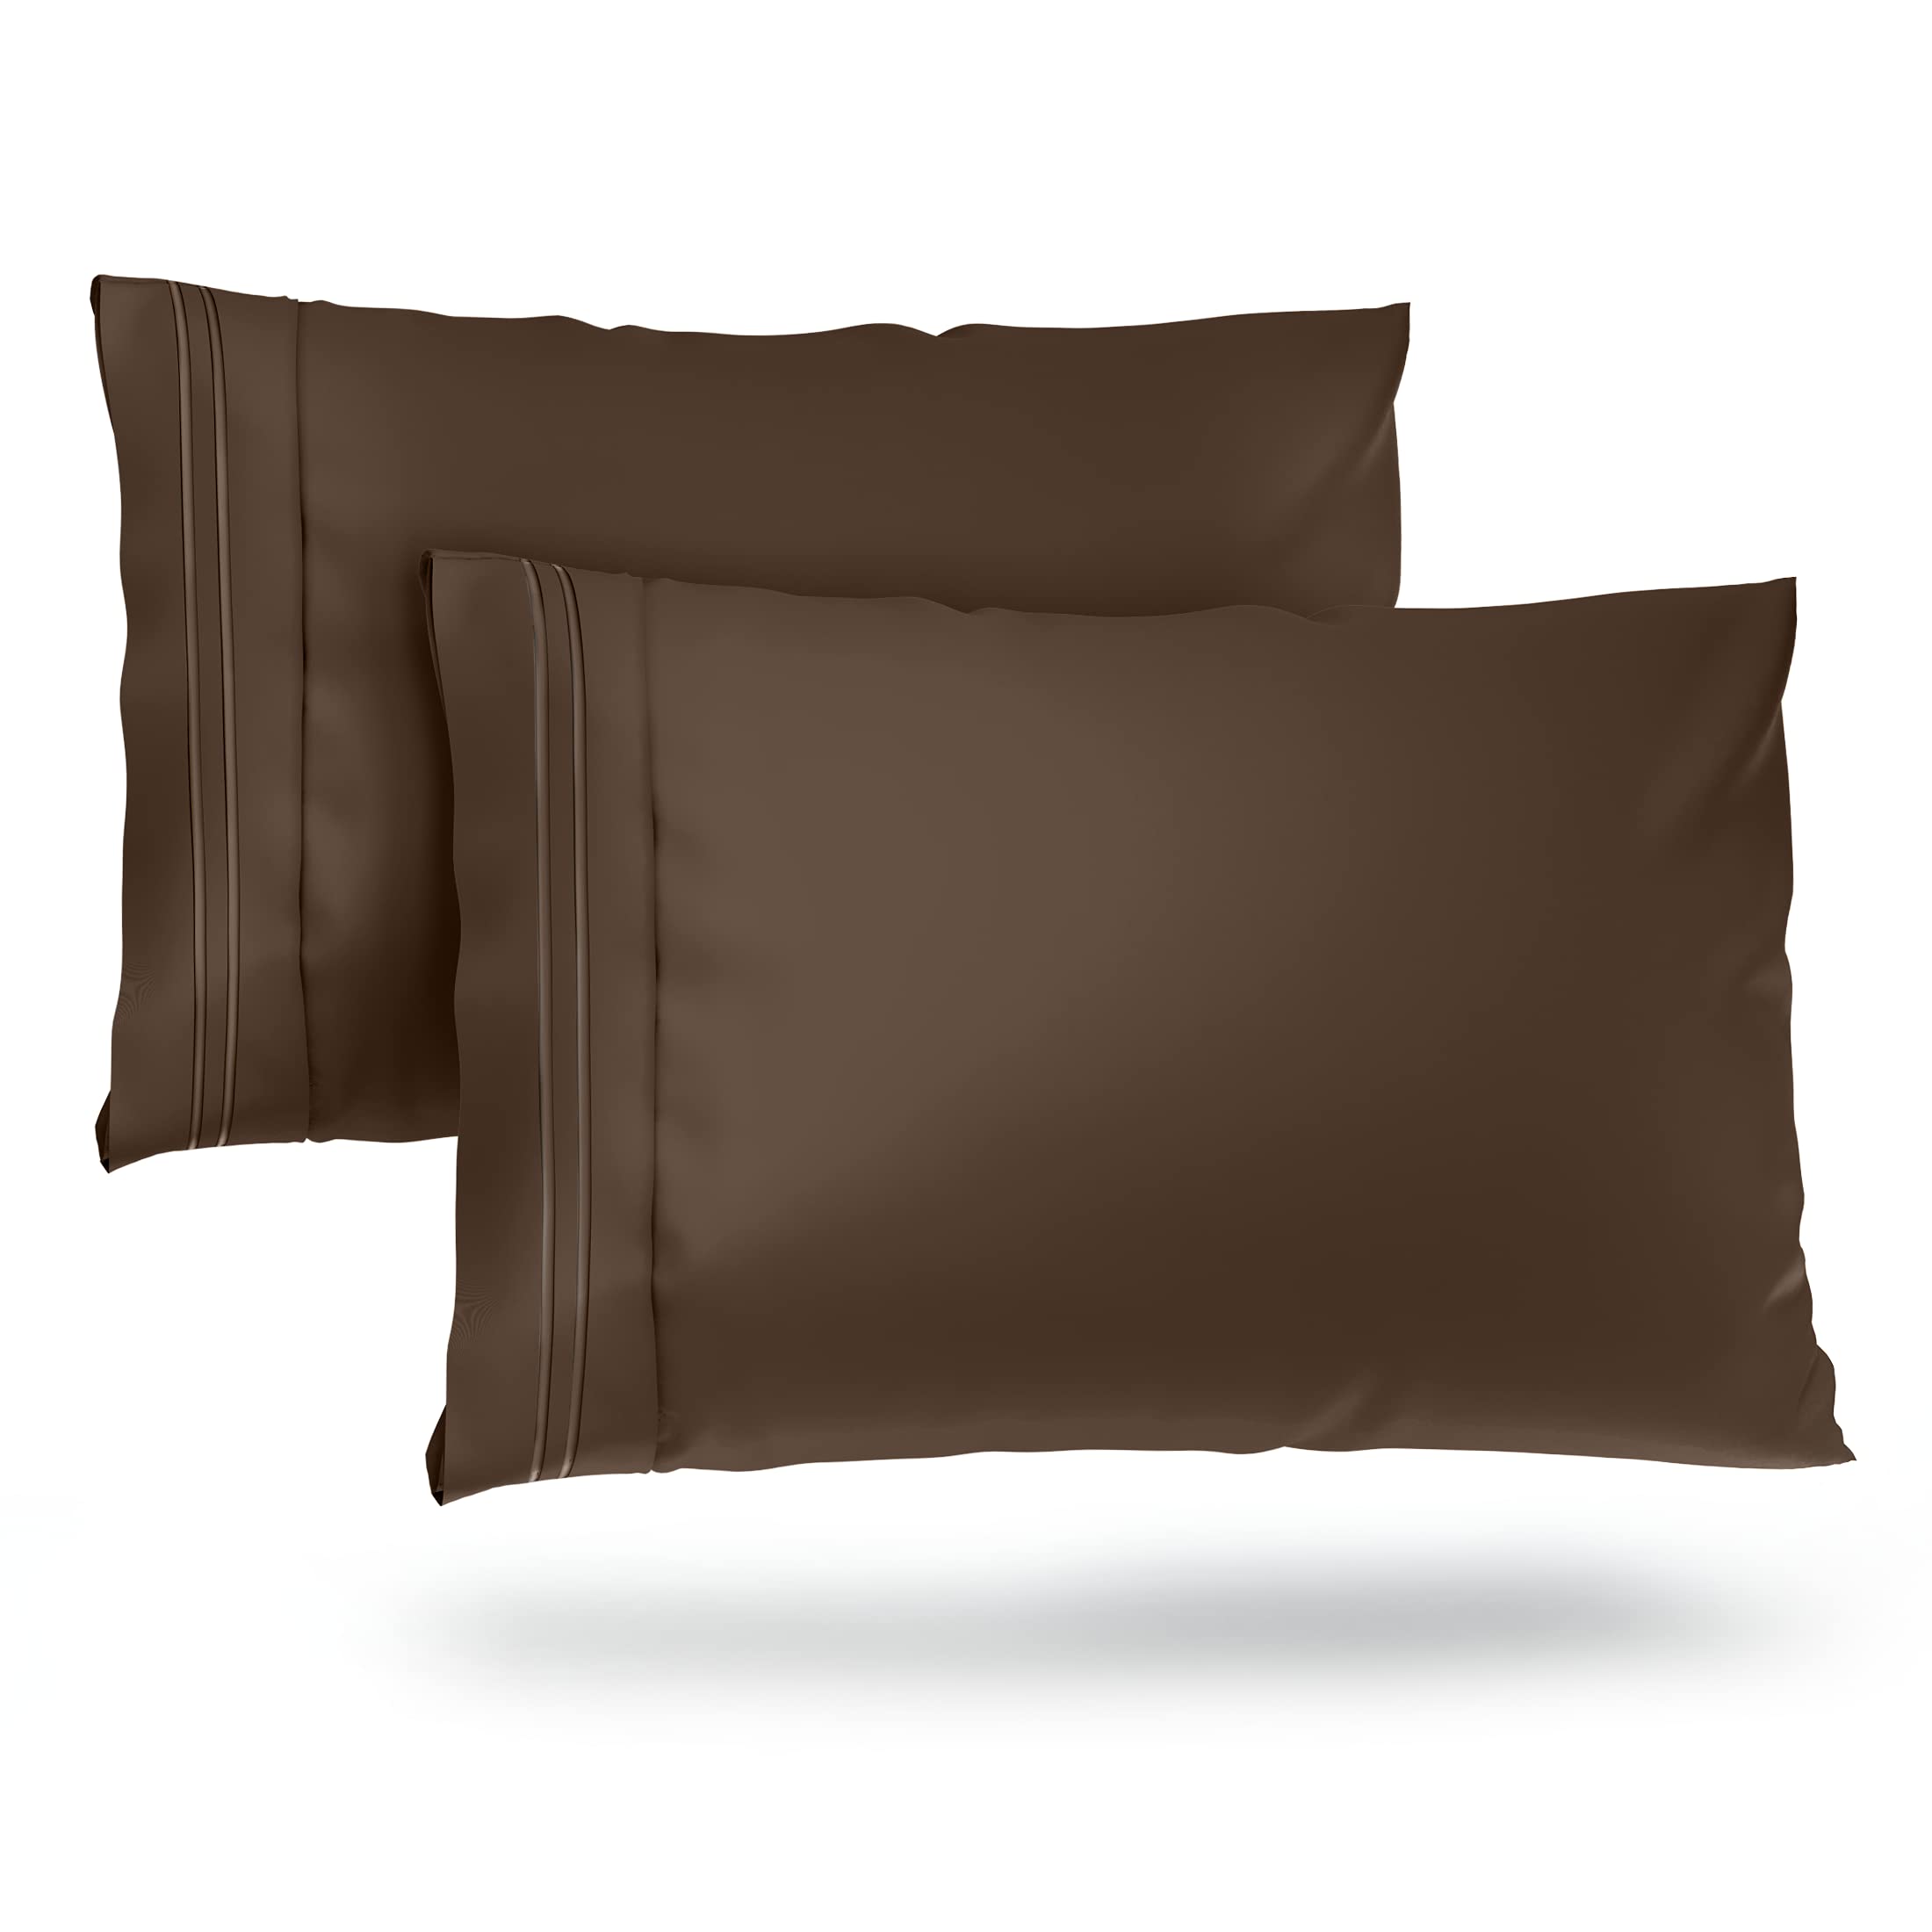 Book Cover Cosy House Collection Everyday 1500 Series Pillowcases - Master Bedroom Essentials - Luxury Hotel Quality - Silky Soft & Smooth - Gentle & Skin Friendly - Set of 2 (King, Chocolate) Chocolate King